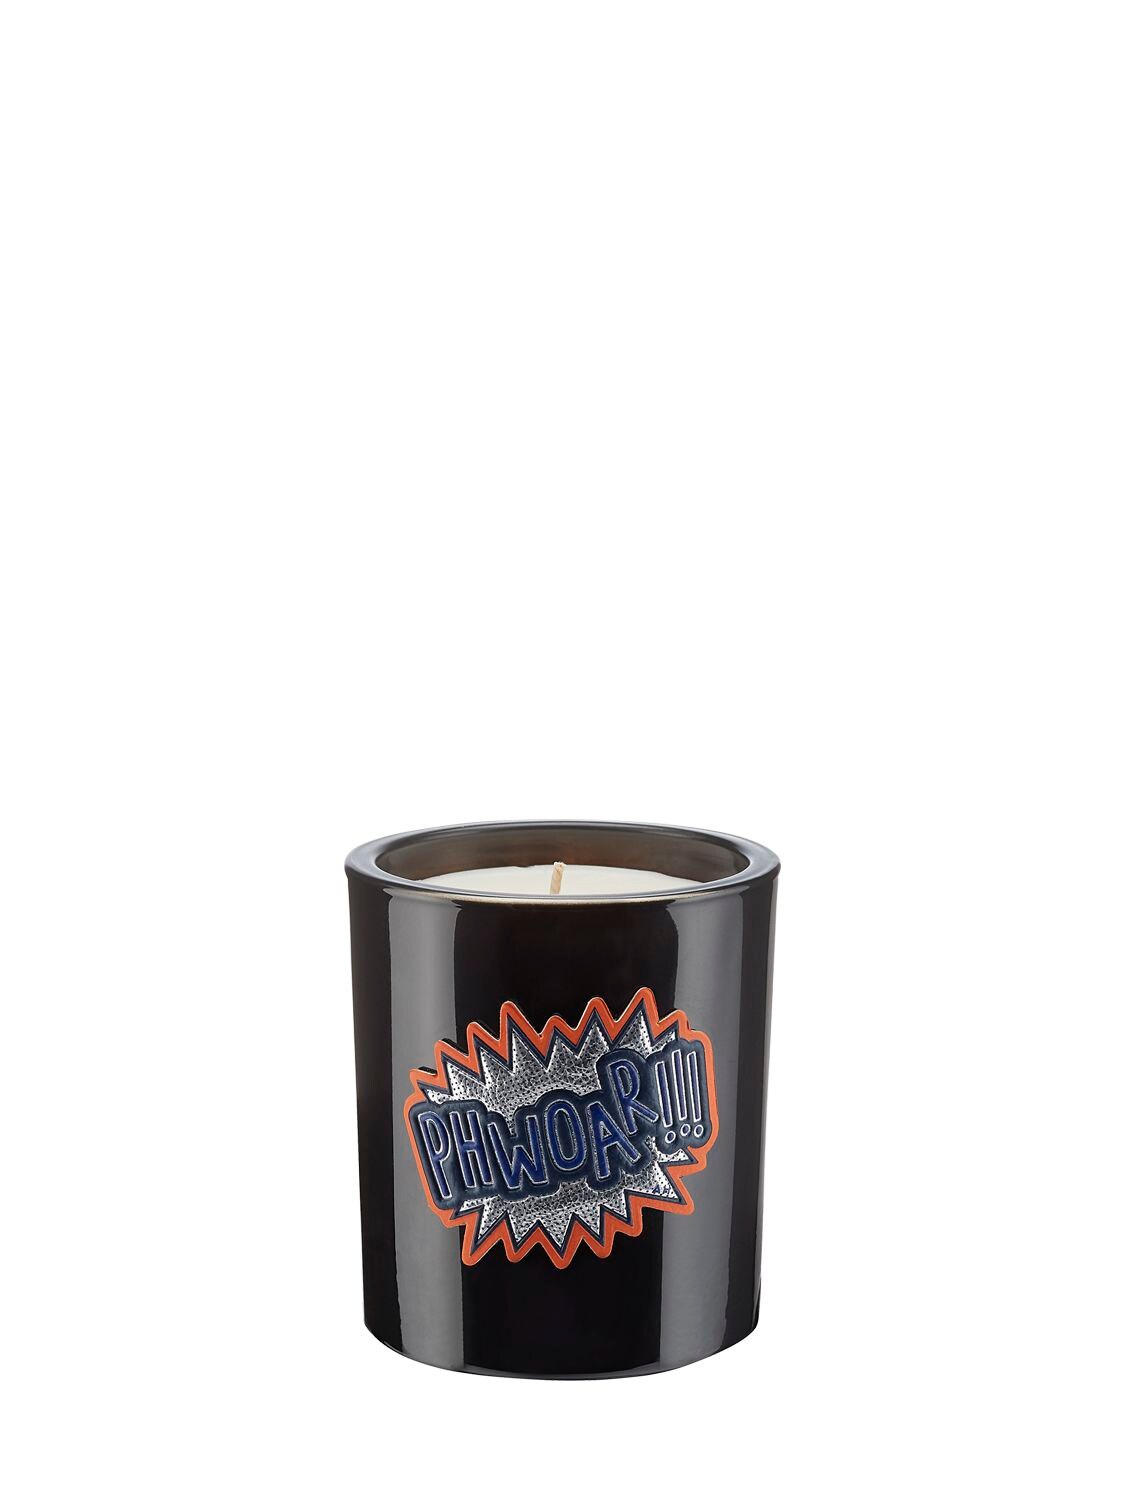 Anya Hindmarch Smells 175gr Toothpaste Scented Candle In Black